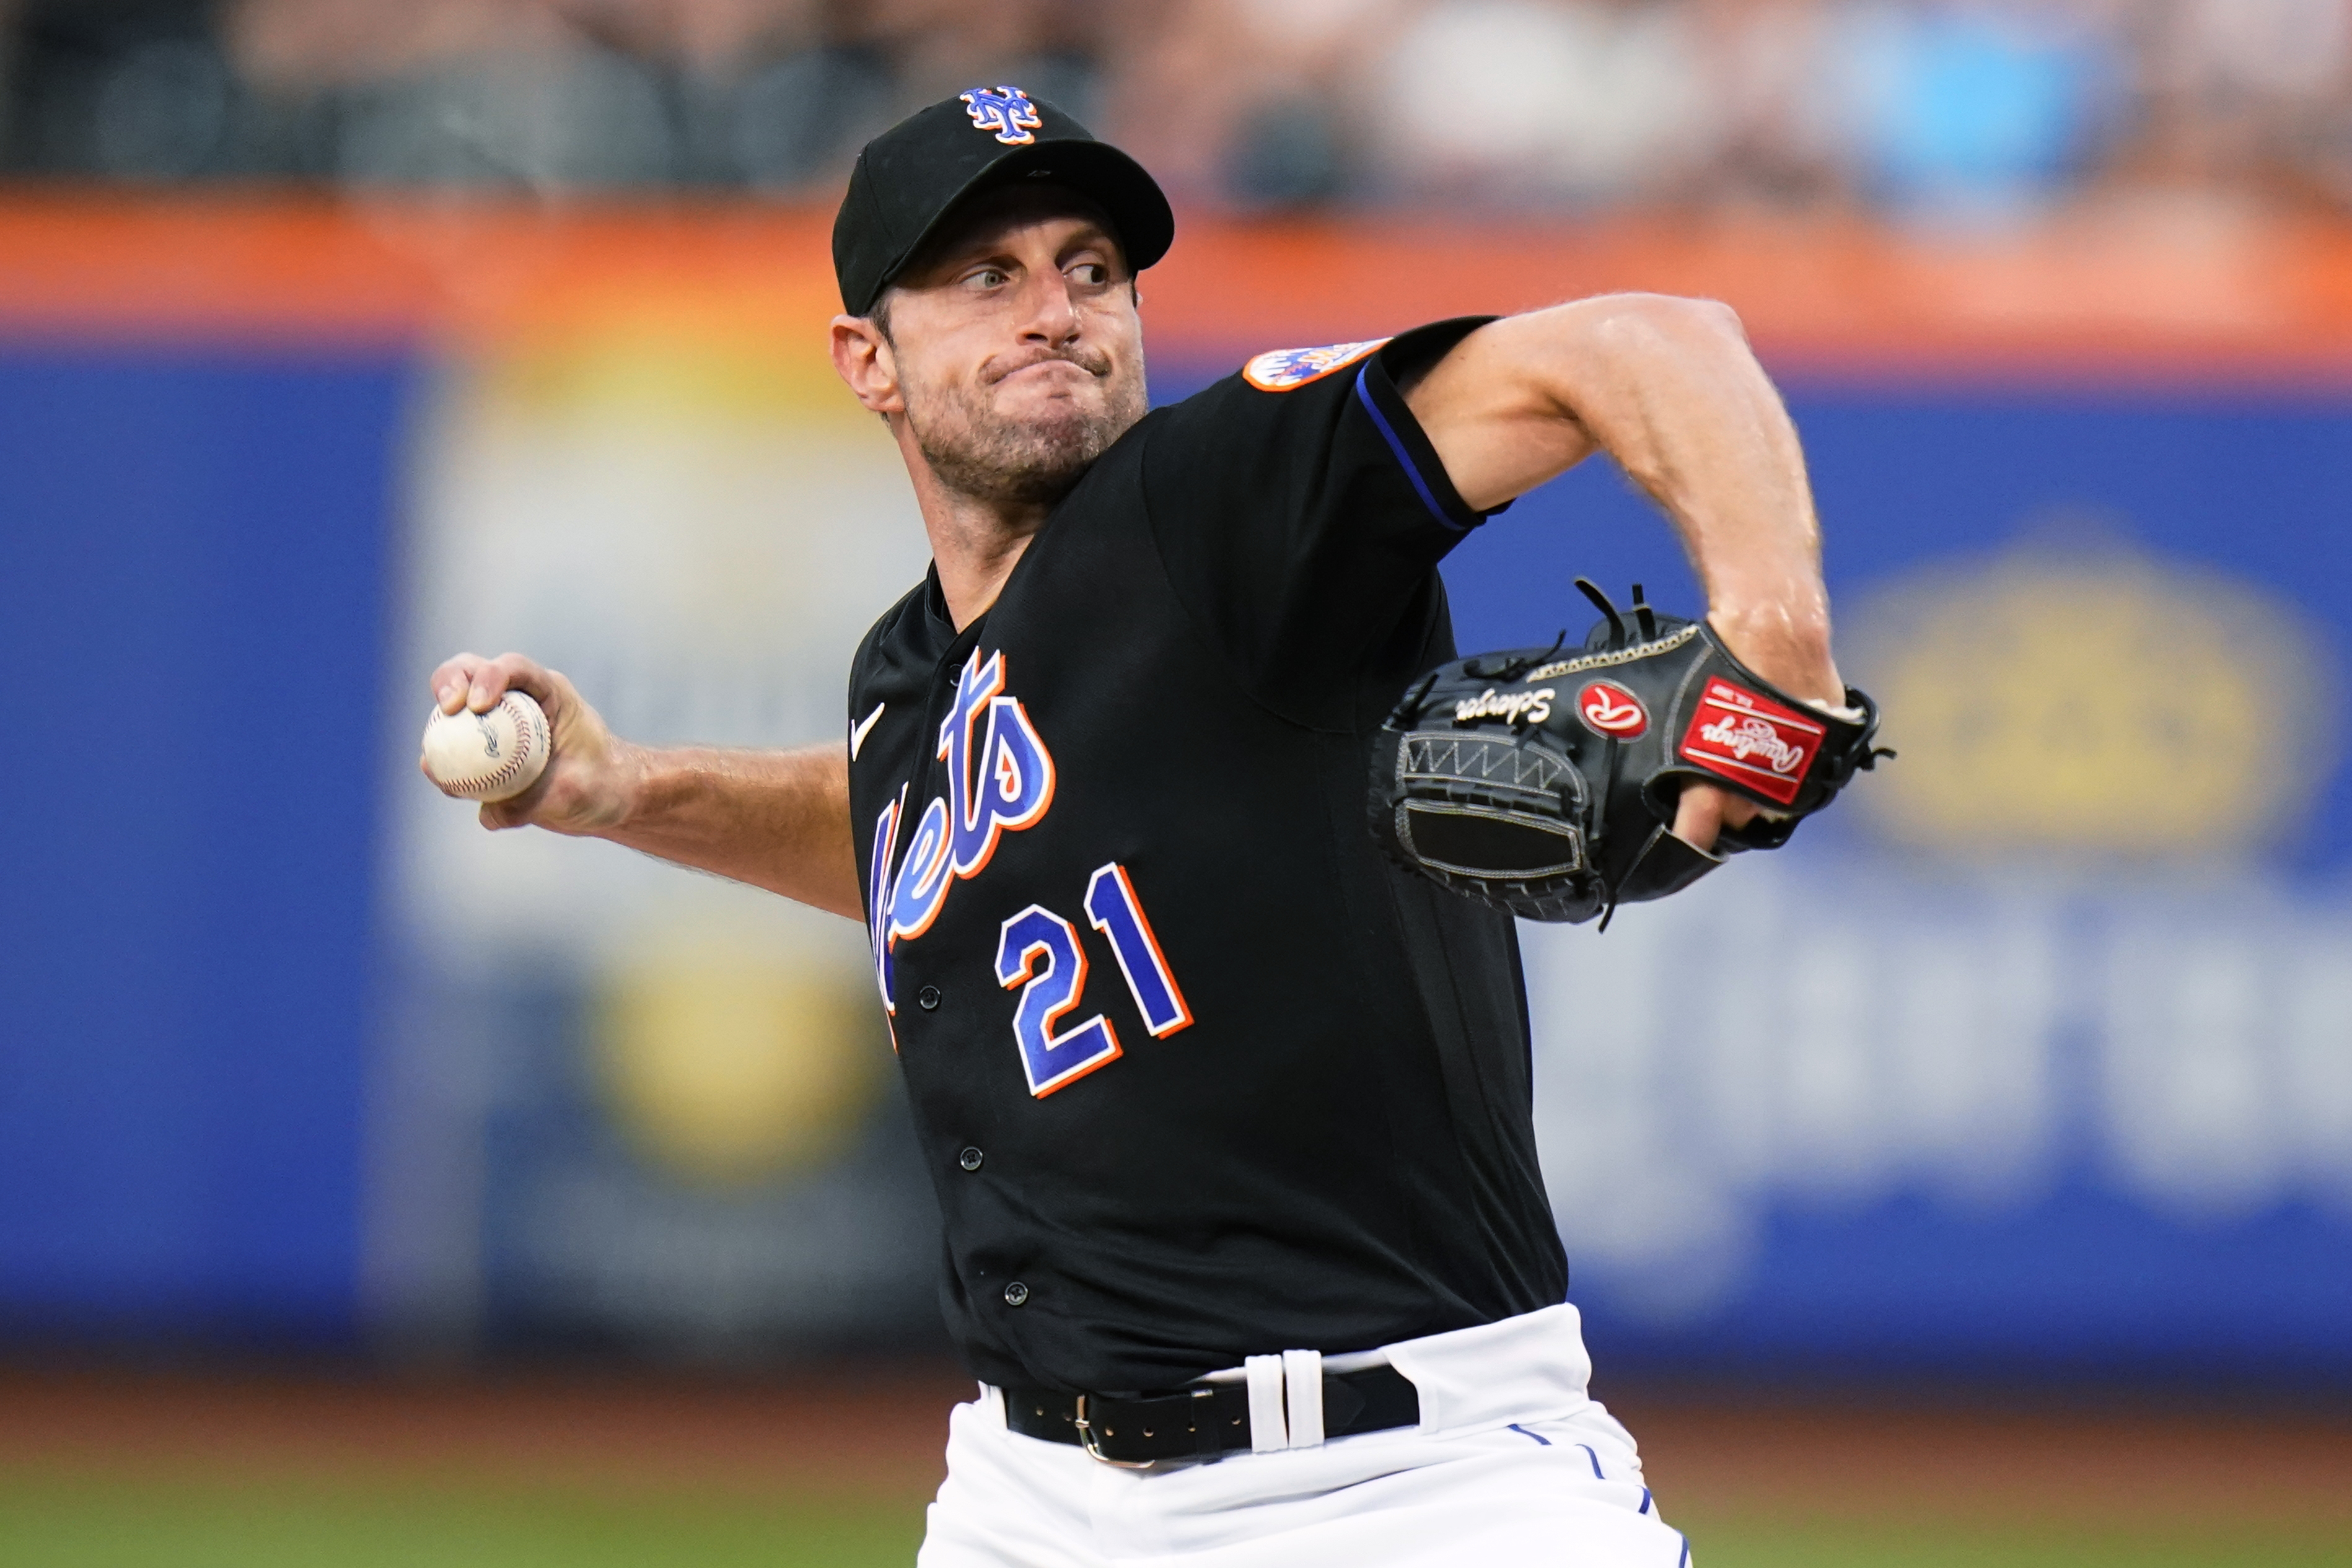 Why the Mets are starting Max Scherzer in Game 1 and holding Jacob